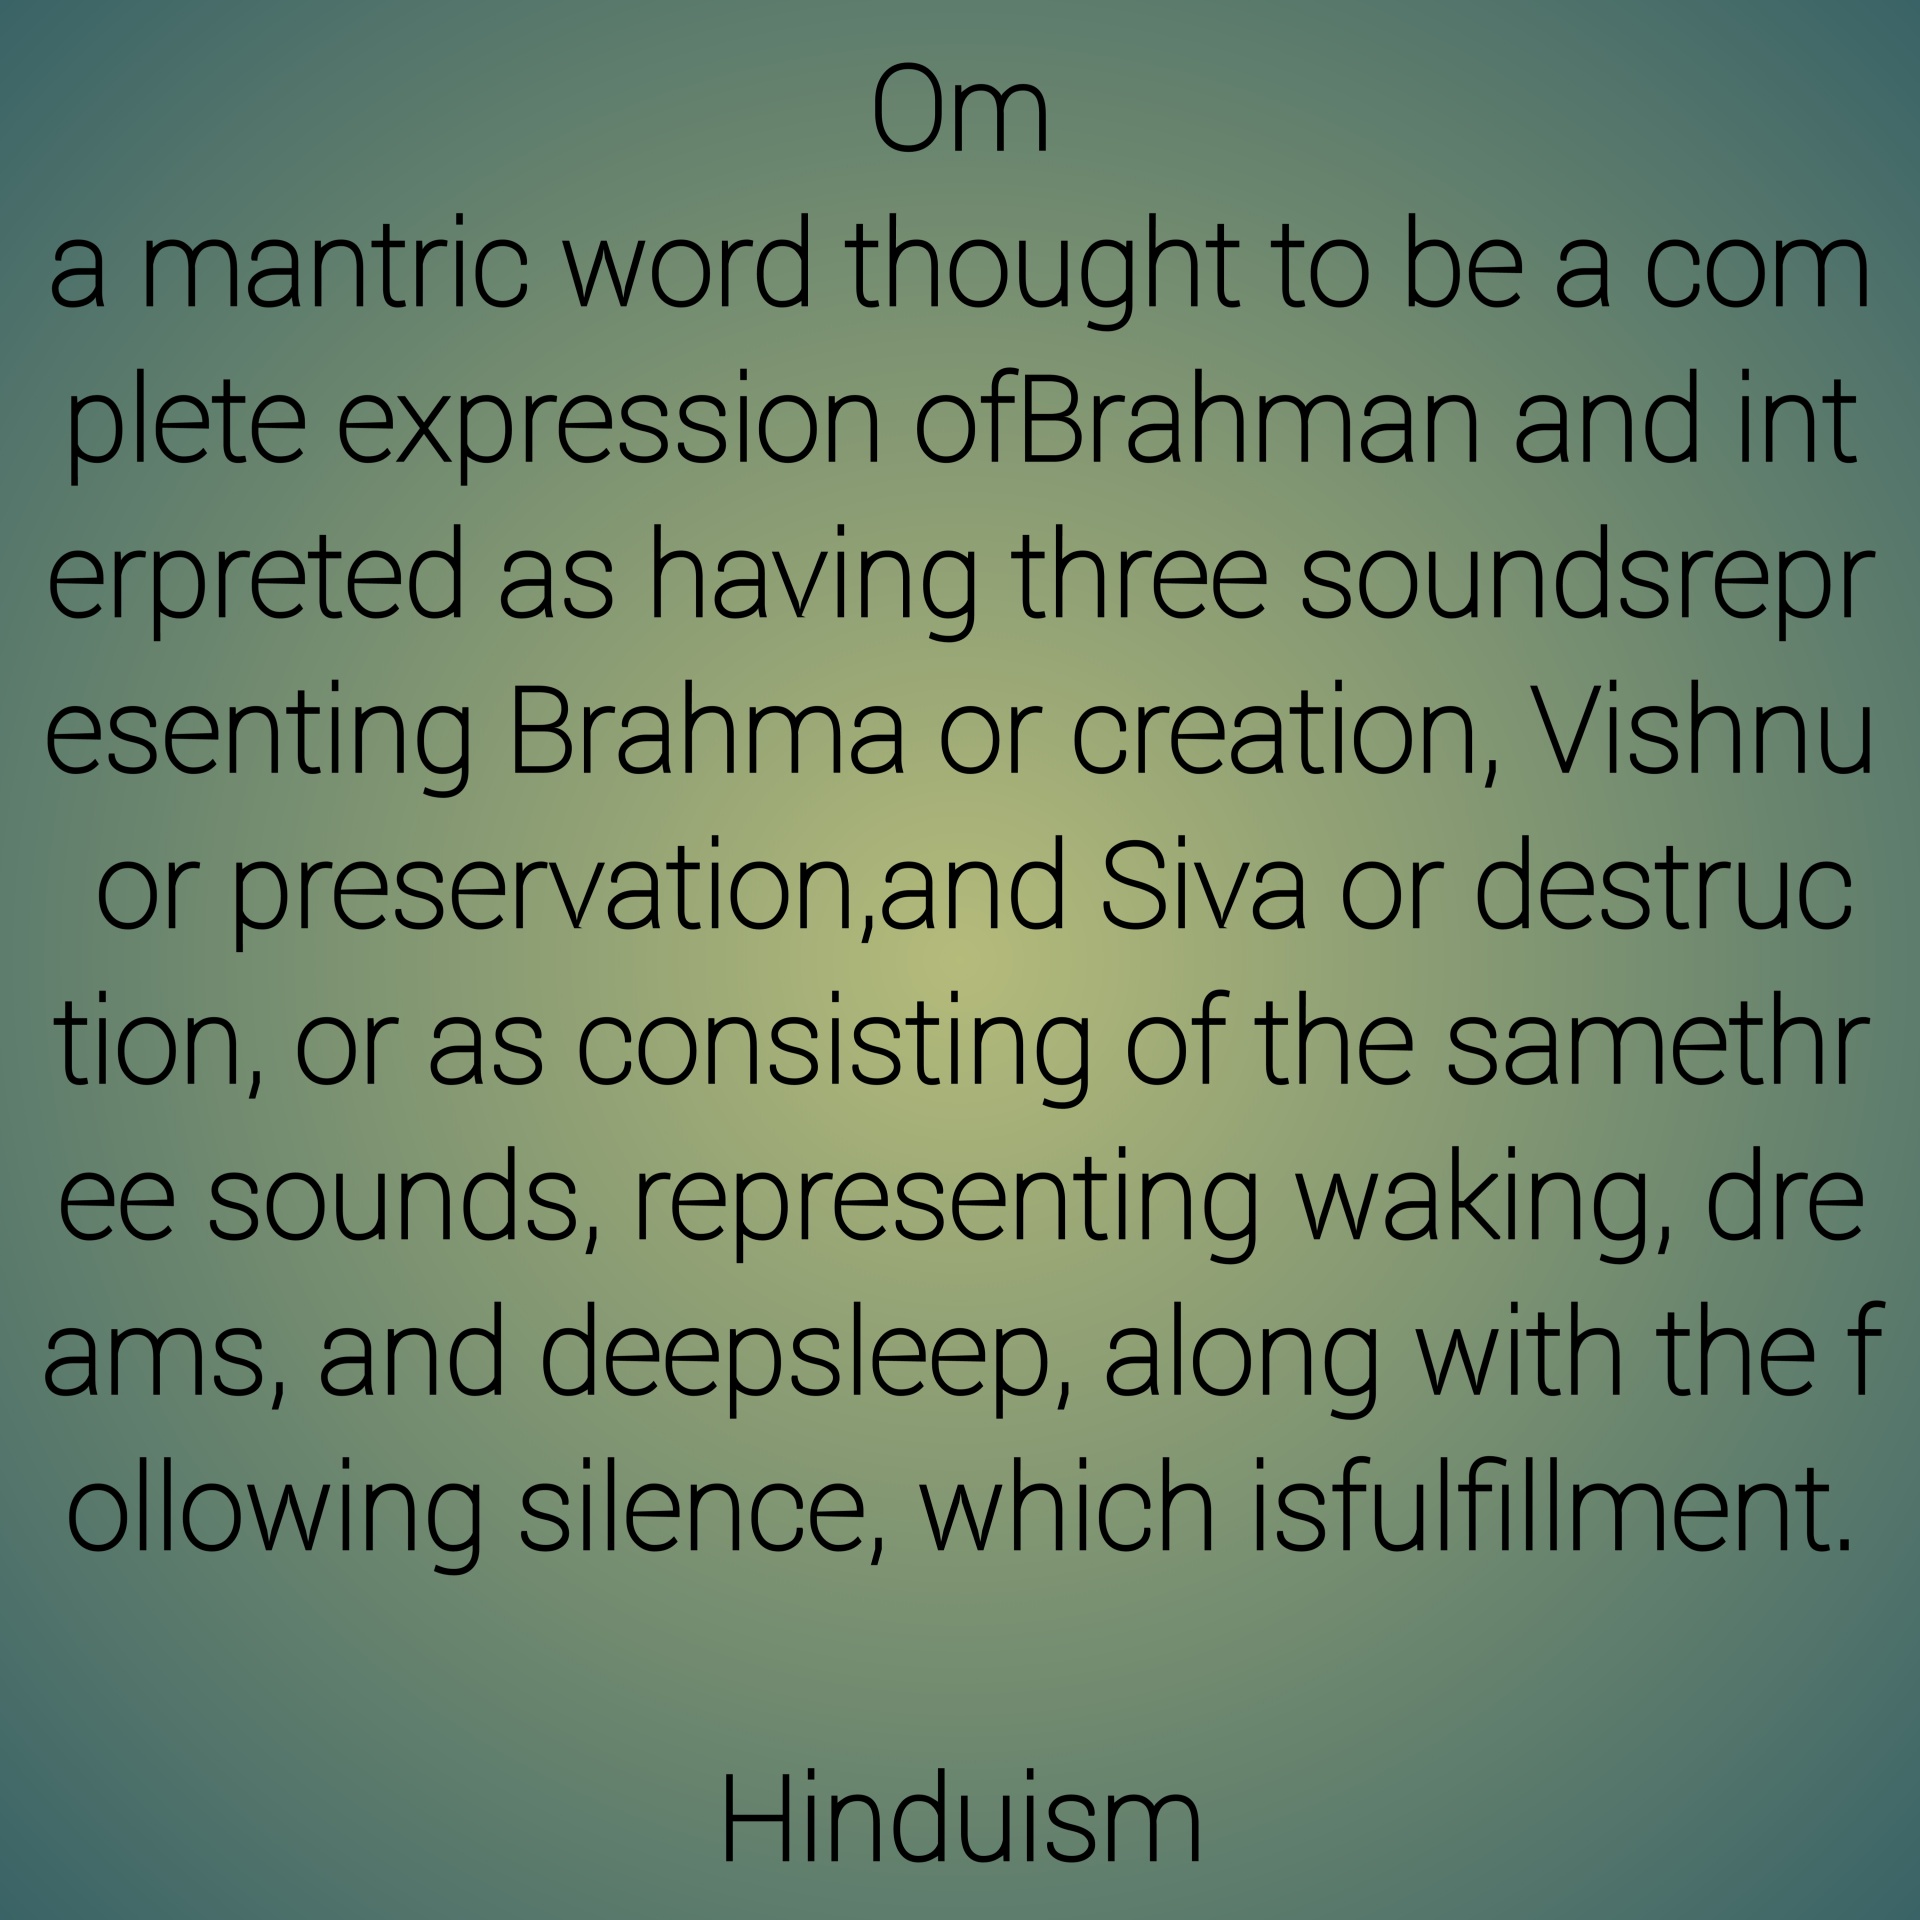 a mantric word thought to be a complete expression of Brahman and interpreted as having three sounds representing Brahma or creation, Vishnu or preservation, and Siva or destruction, or as consisting of the same three sounds, representing waking